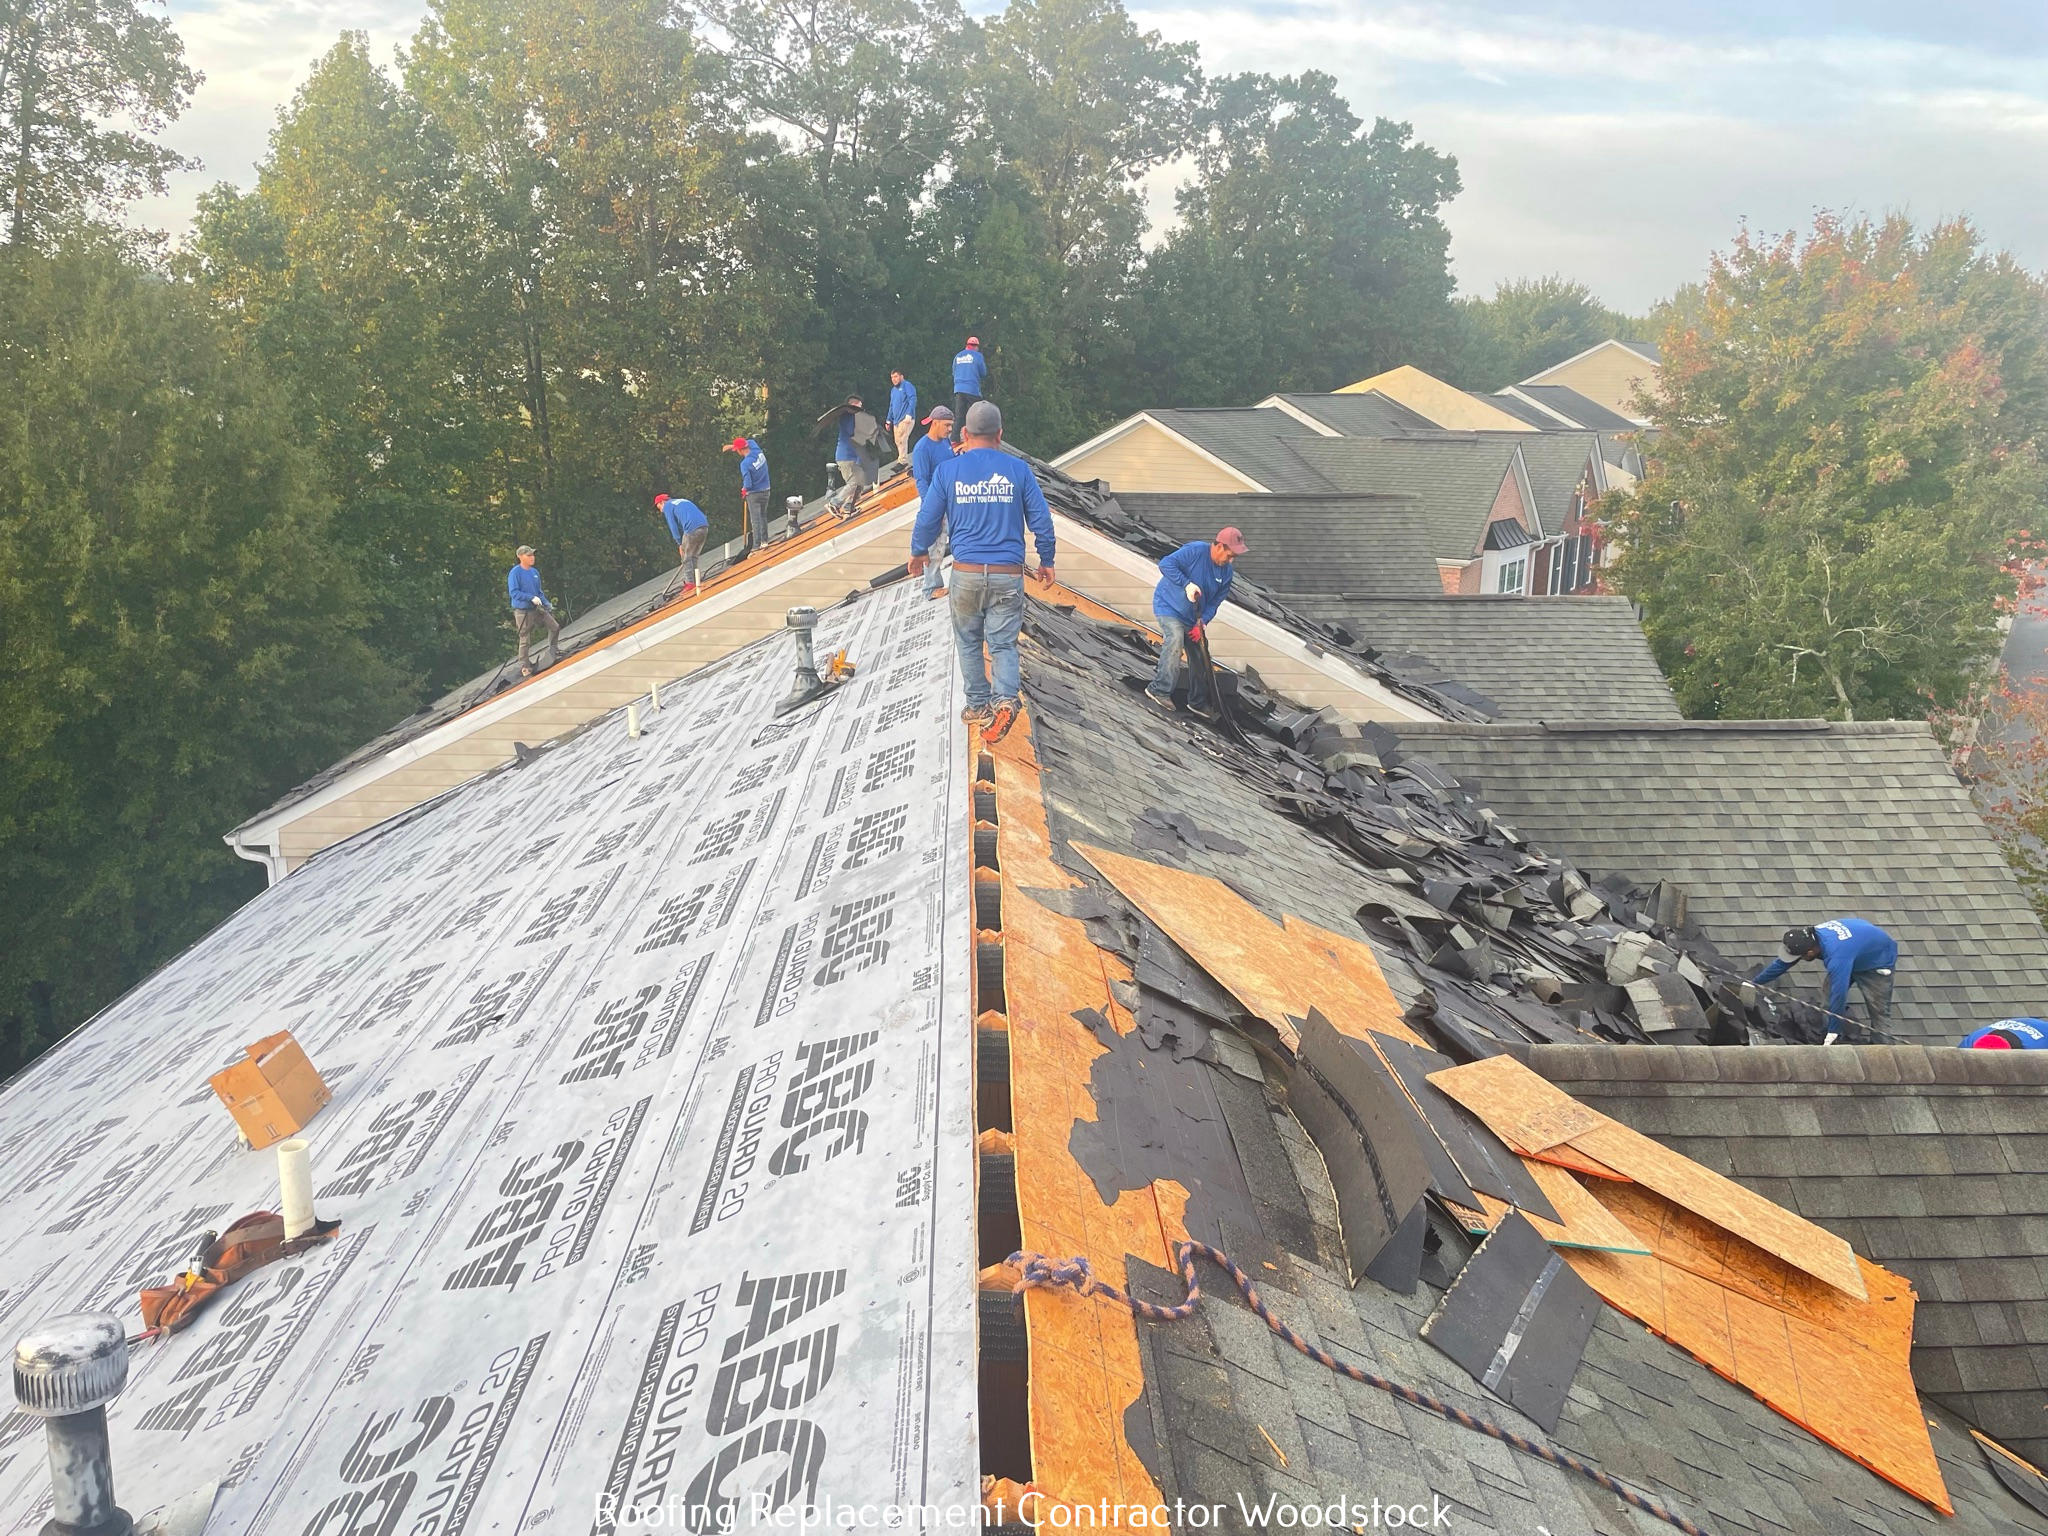 RoofSmart Explains How Their Roofing Replacement Services Meet Industry Standards